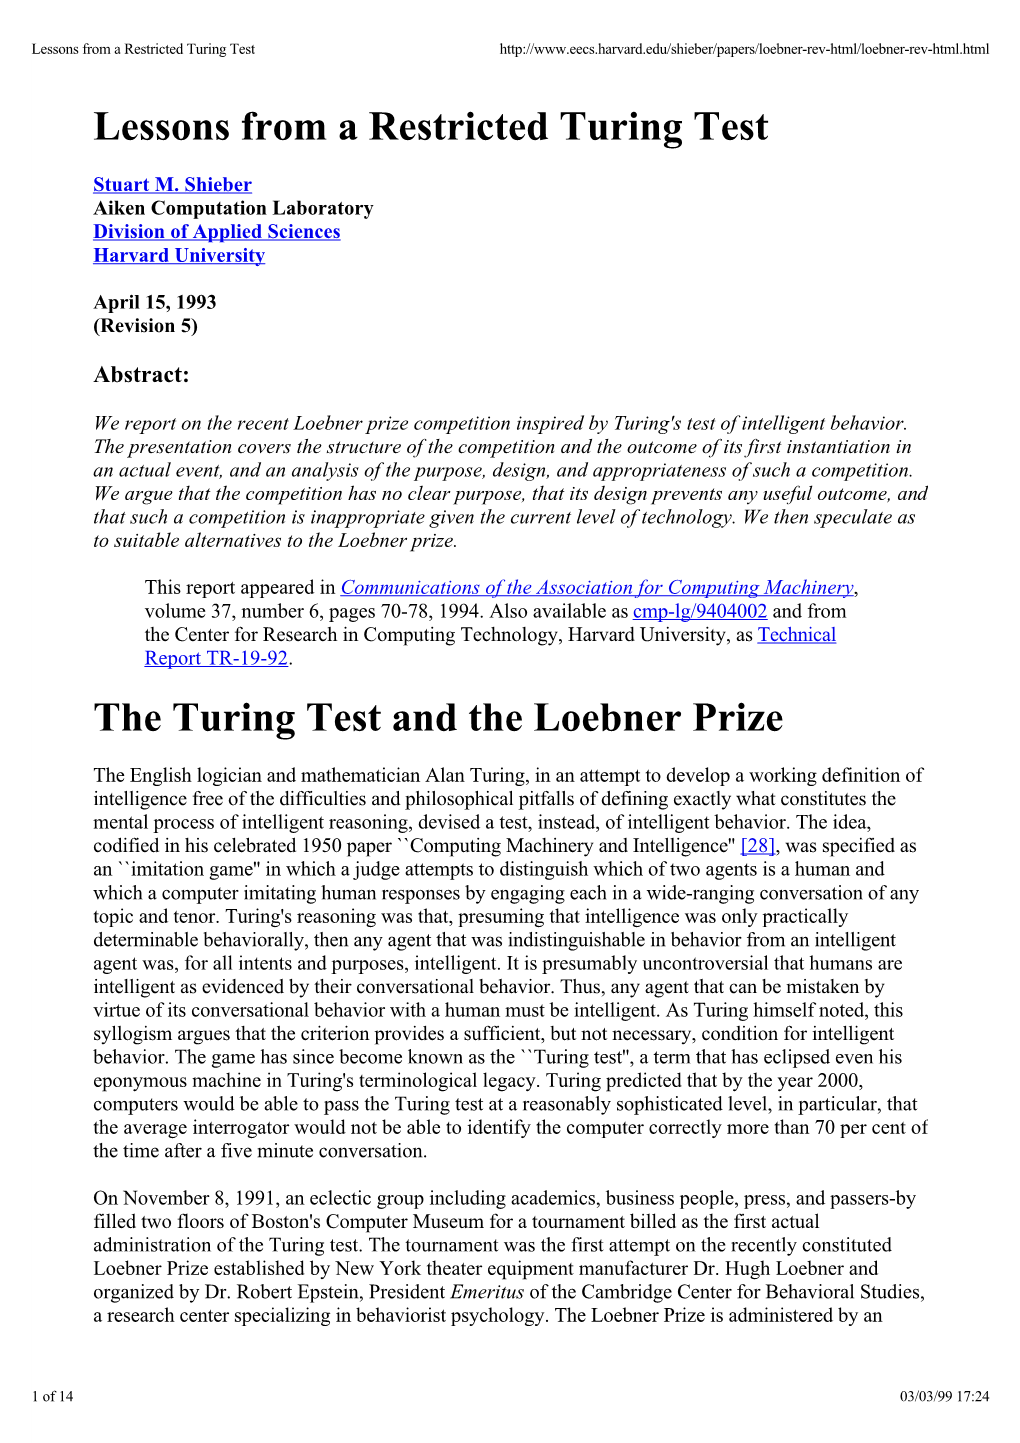 Lessons from a Restricted Turing Test the Turing Test and the Loebner Prize